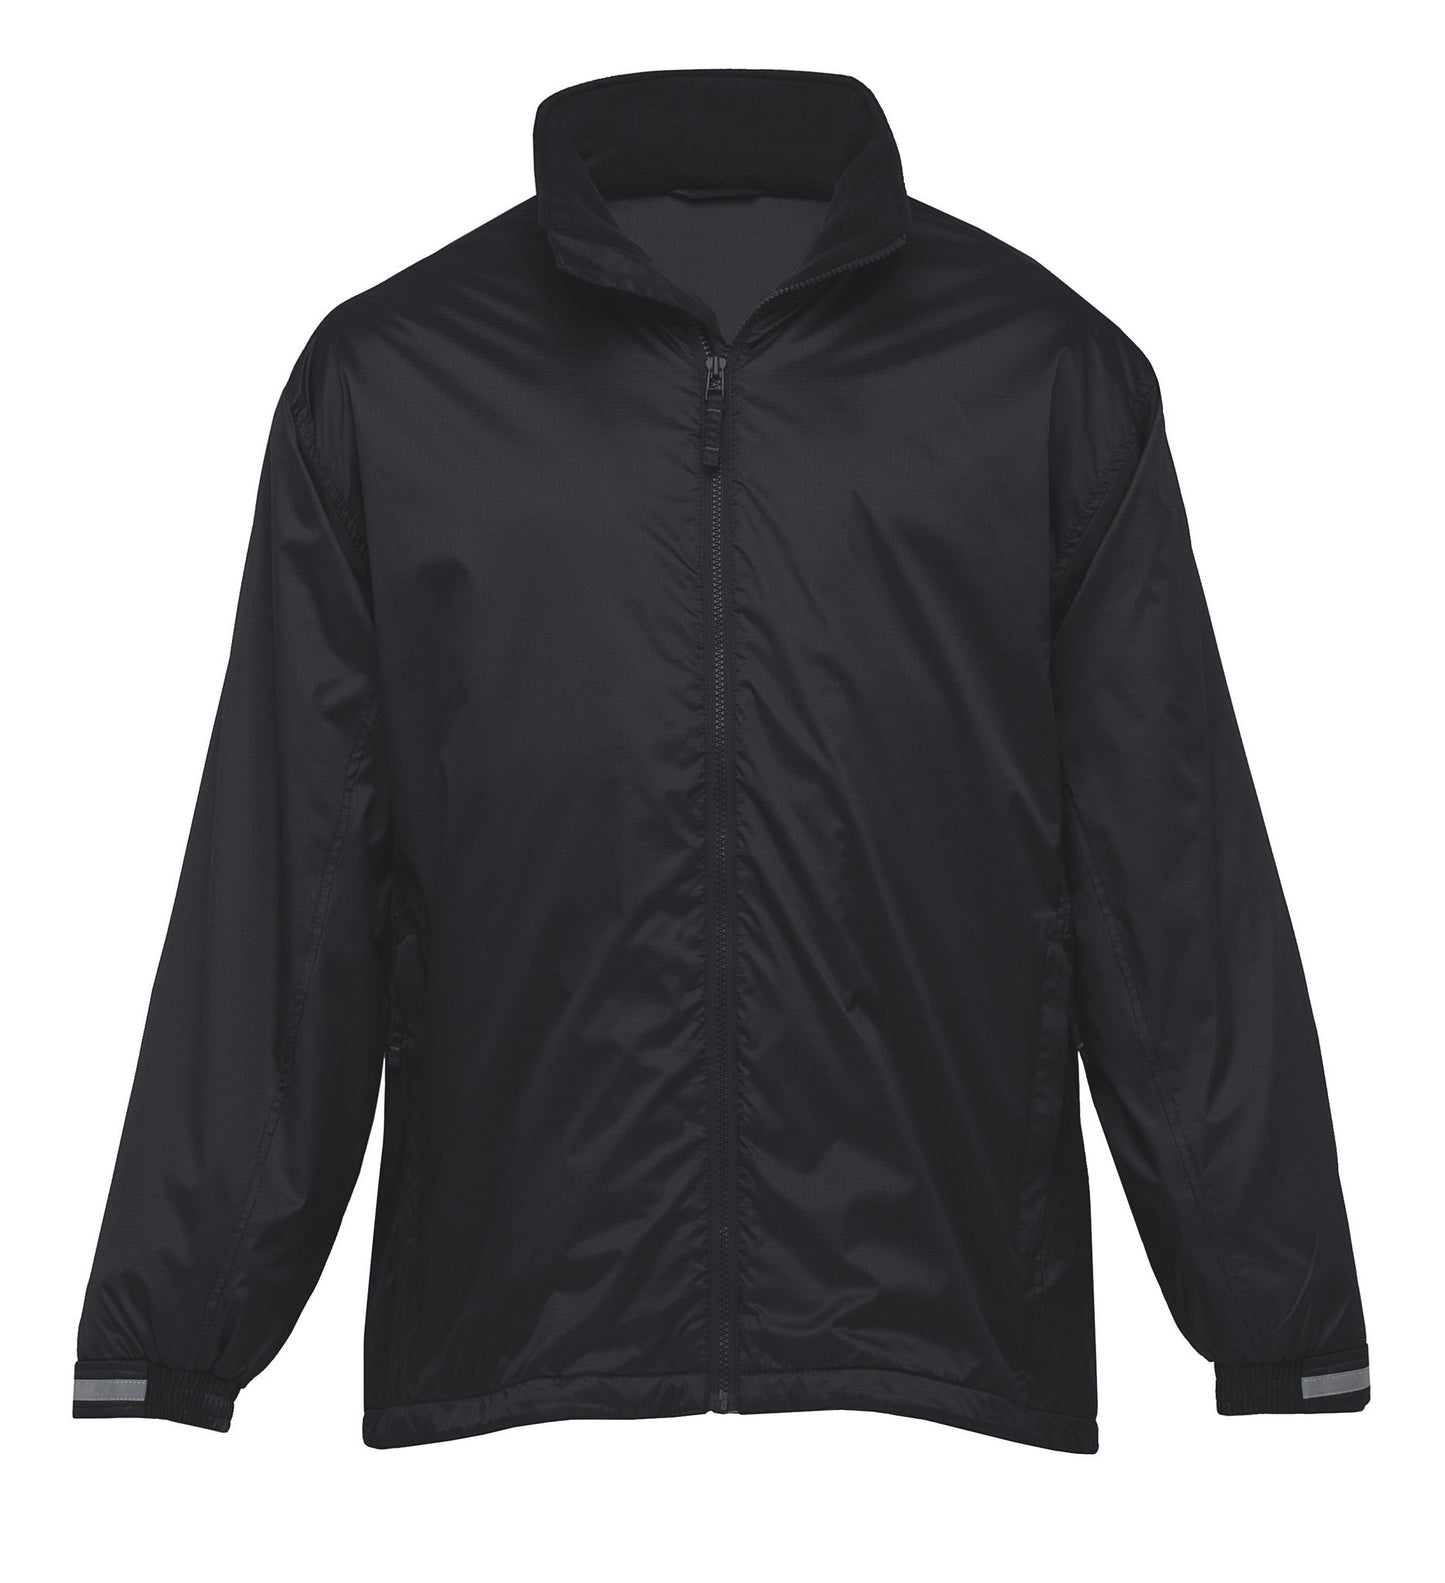 Gear For Life Manager’s Jacket (MJ)